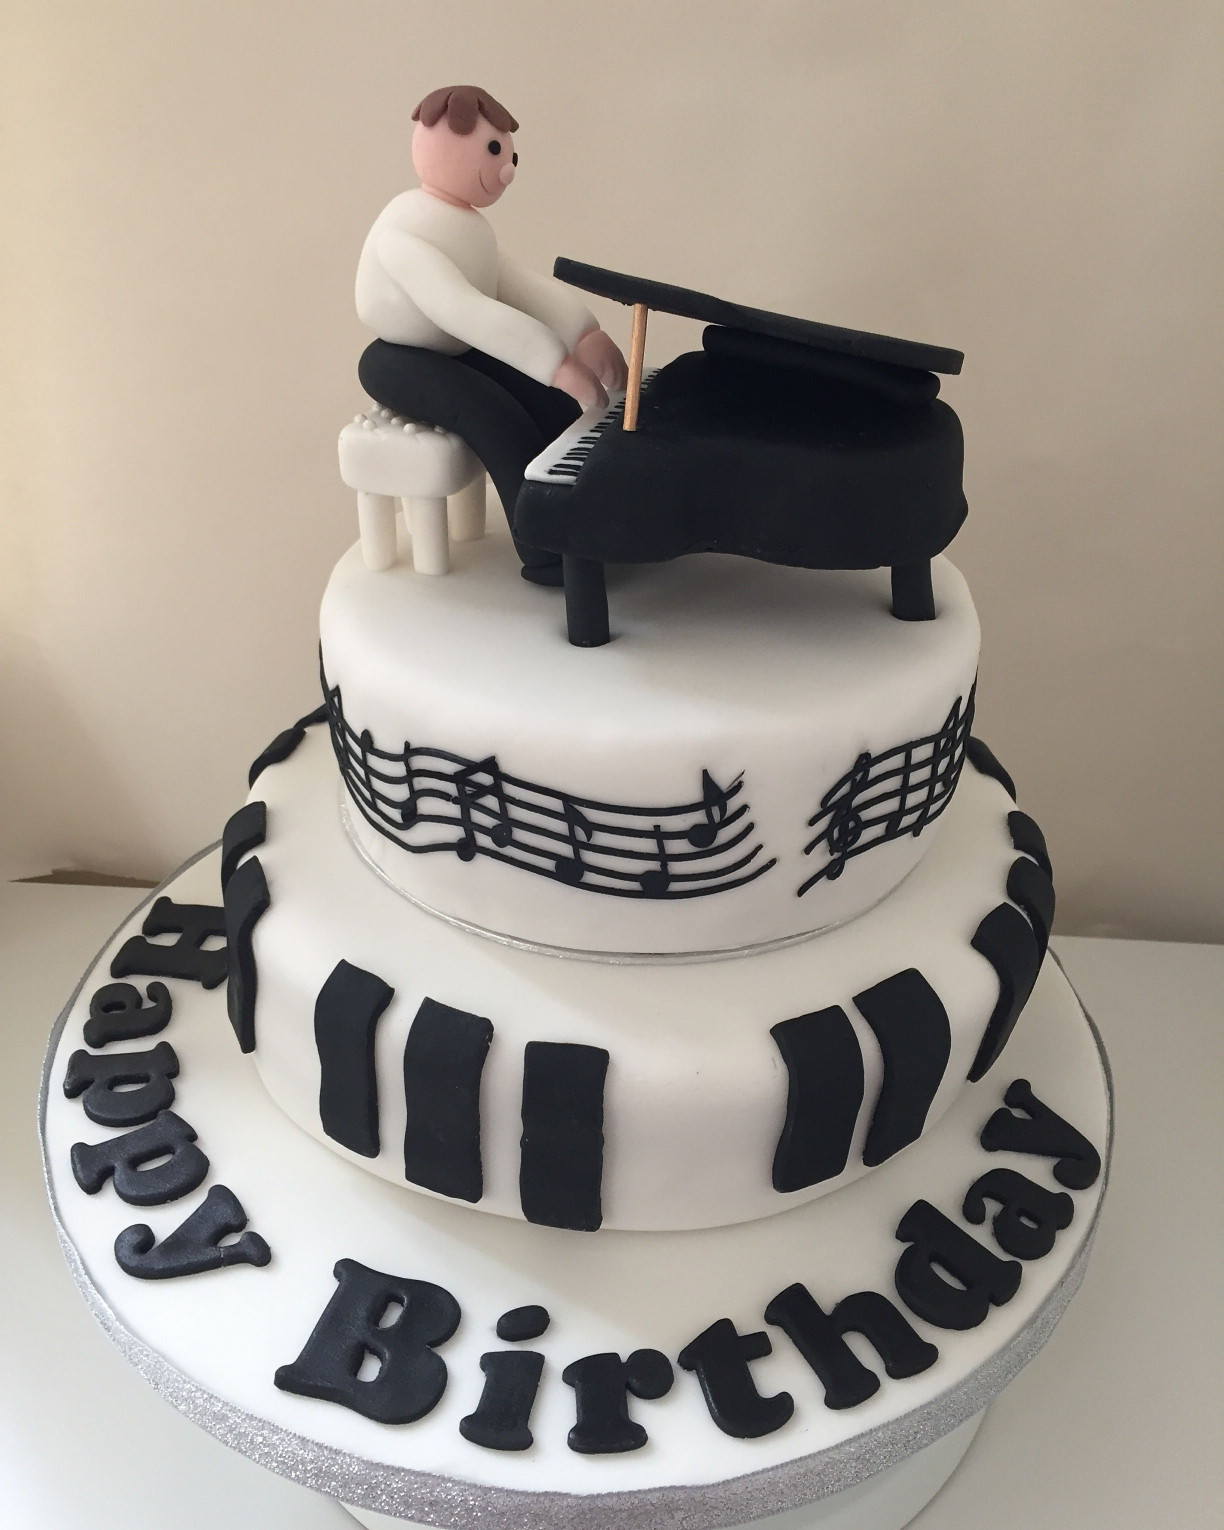 50th Birthday Cakes For Men Lovely Piano Man Cake For - Piano Man Cake - HD Wallpaper 